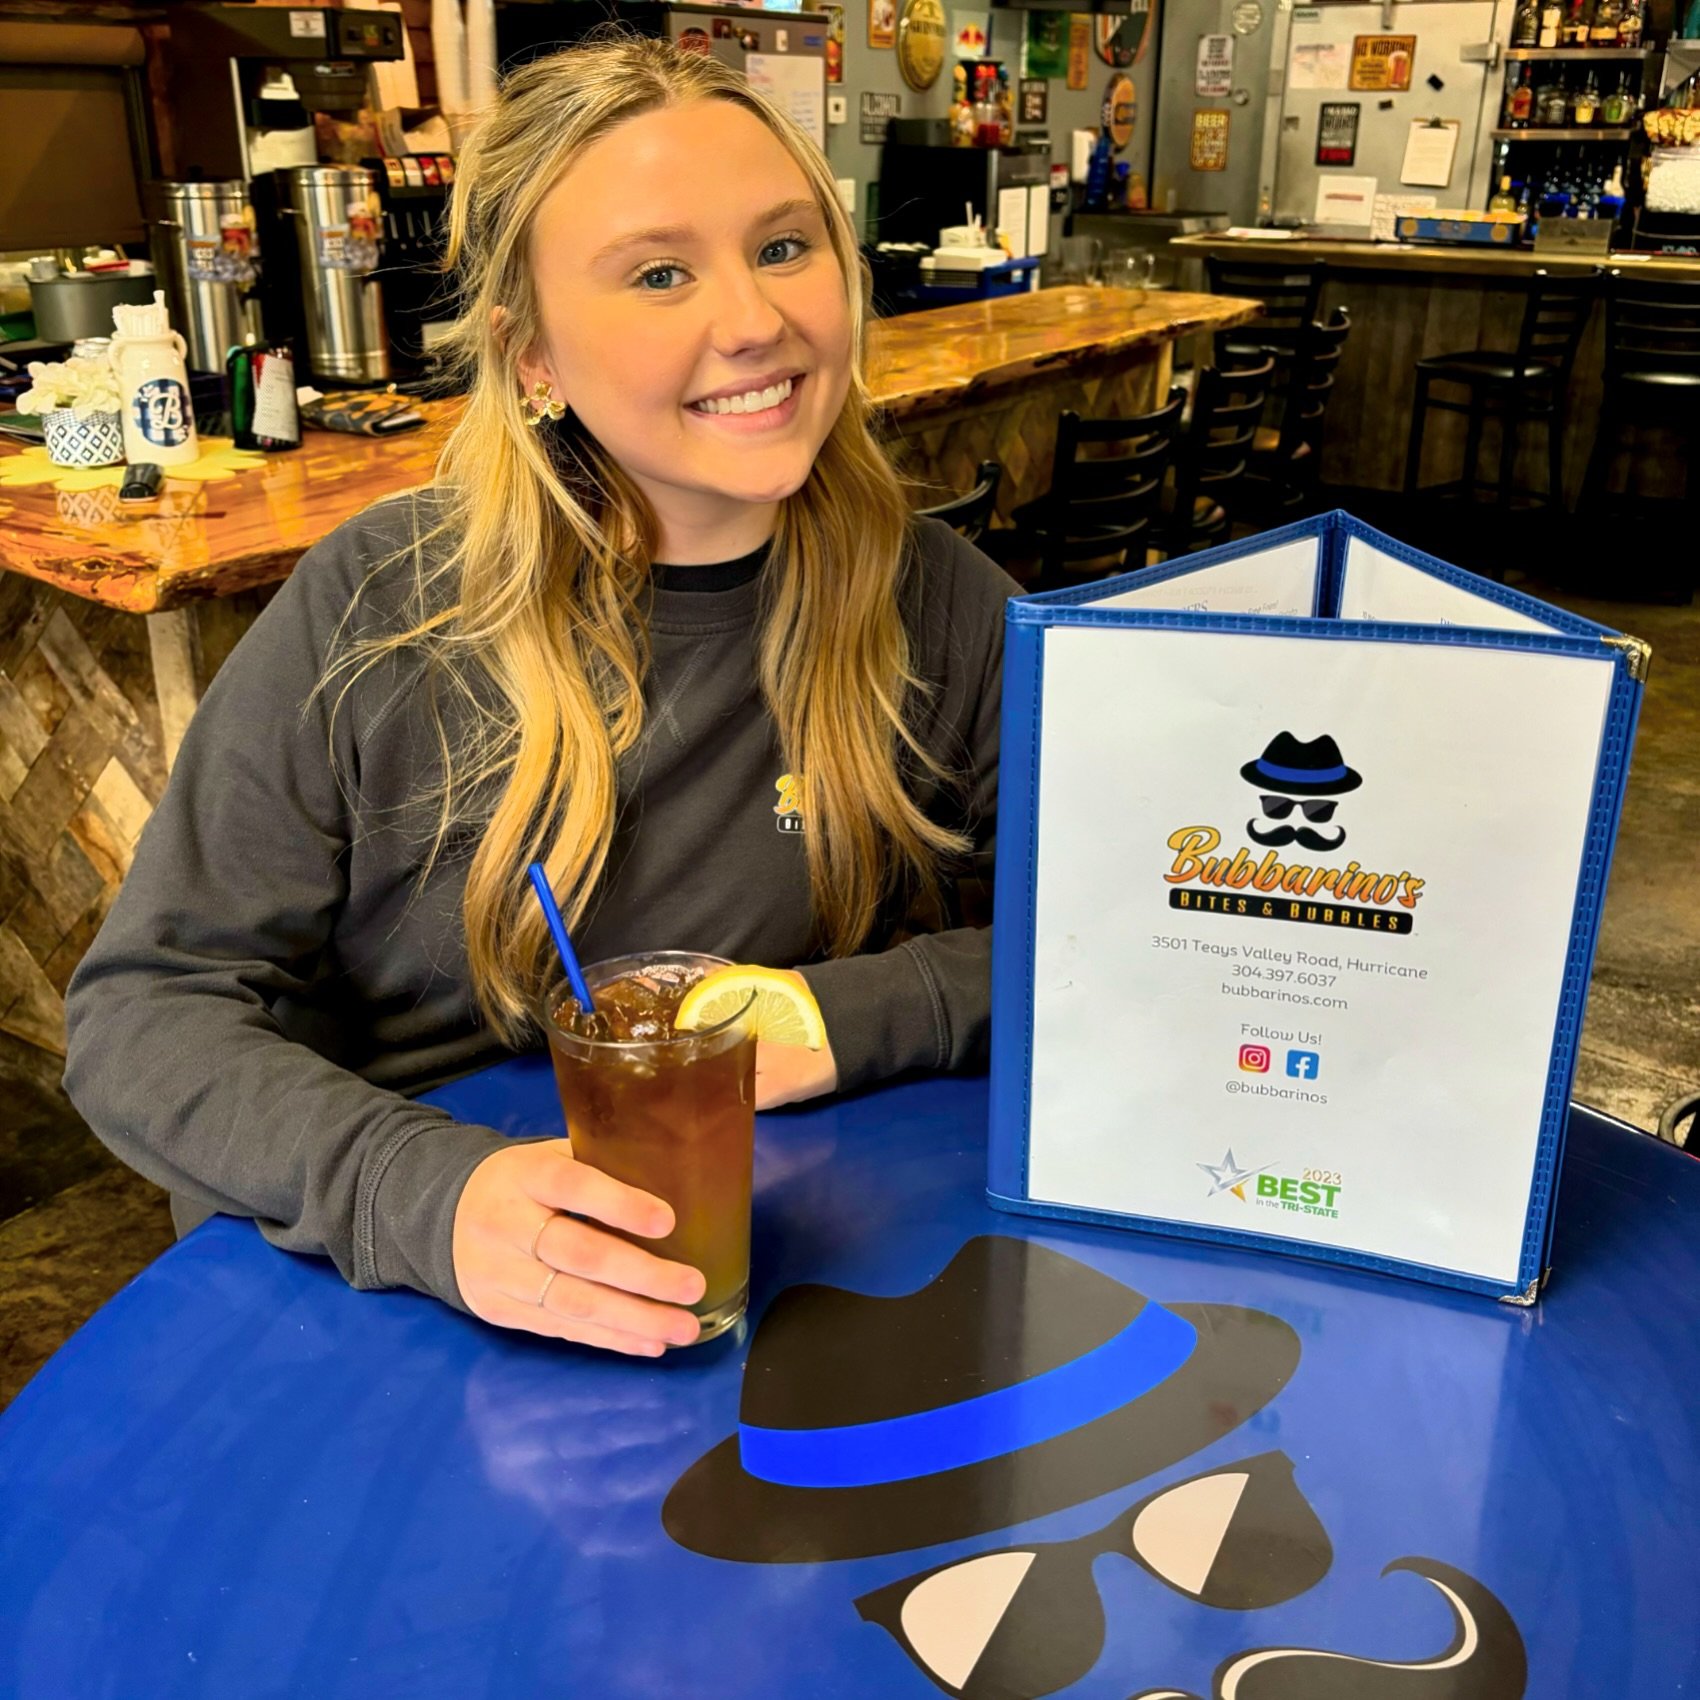 We would like to announce that we have promoted Alyssa to a Shift Manager! 🎉😎

Alyssa has been with us pretty much since day 1! You can normally catch her here on Fridays and Saturdays! She joined us in 2022 as a host, earned a server position, the